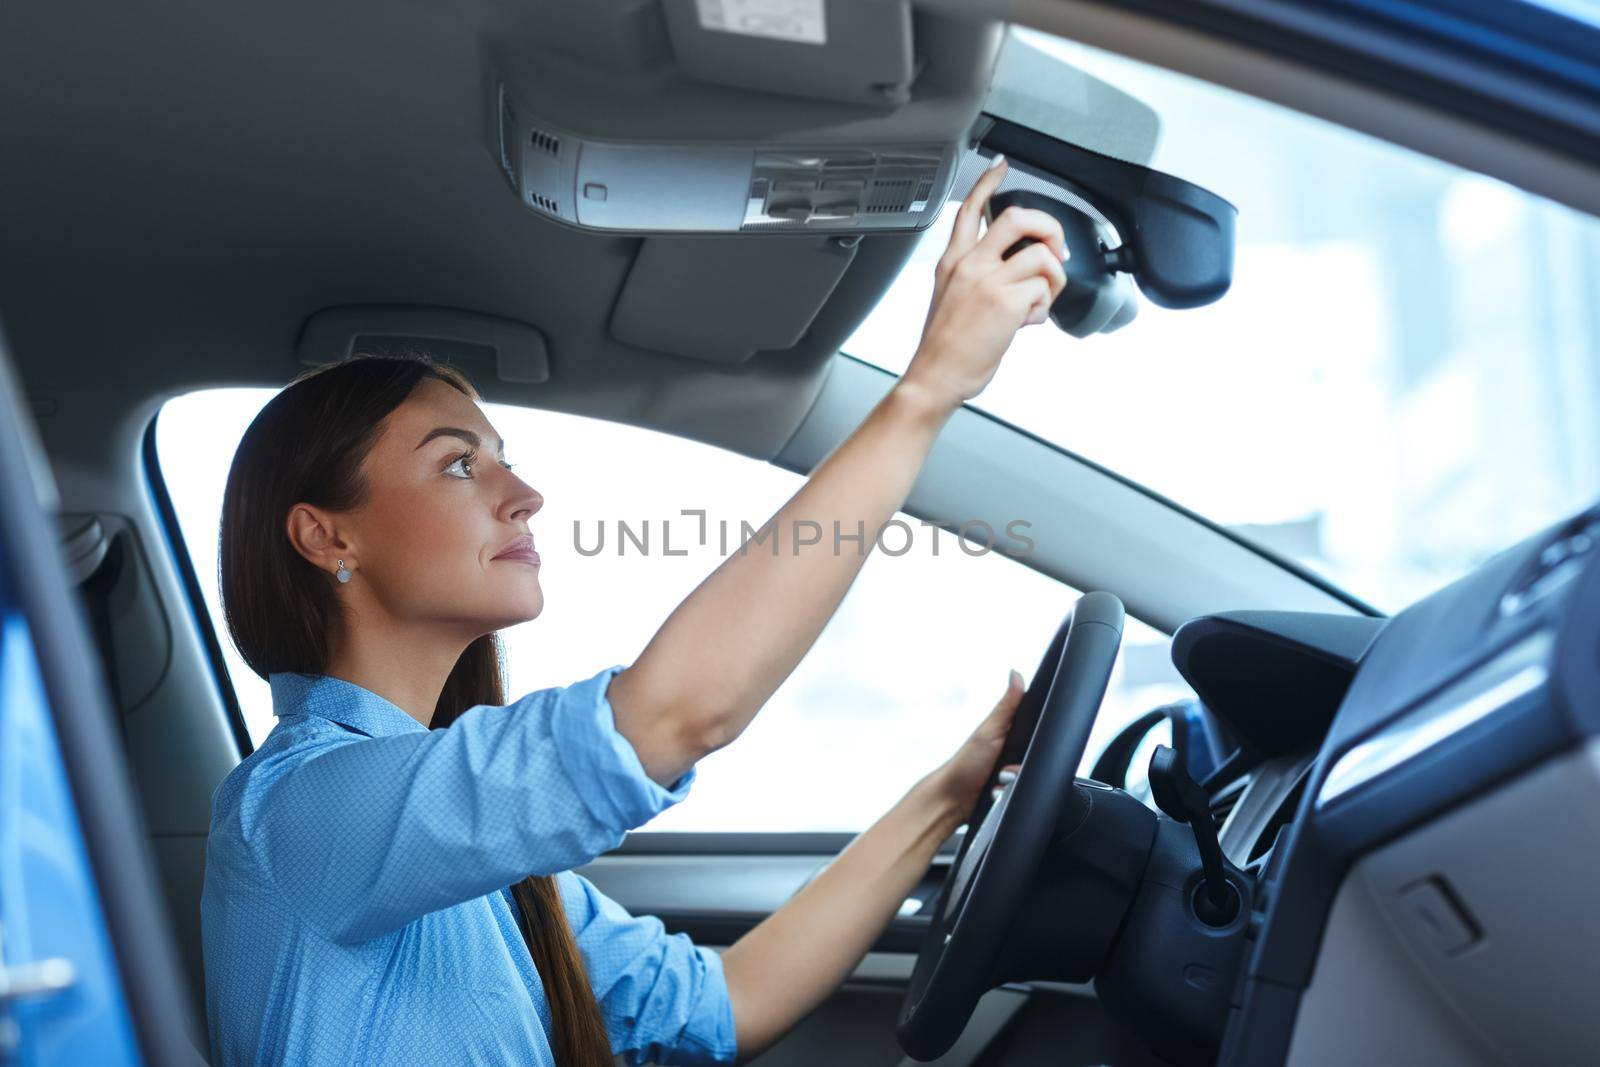 Mirrors fixed. Low angle shot of an attractive woman adjusting a mirror while sitting in a car